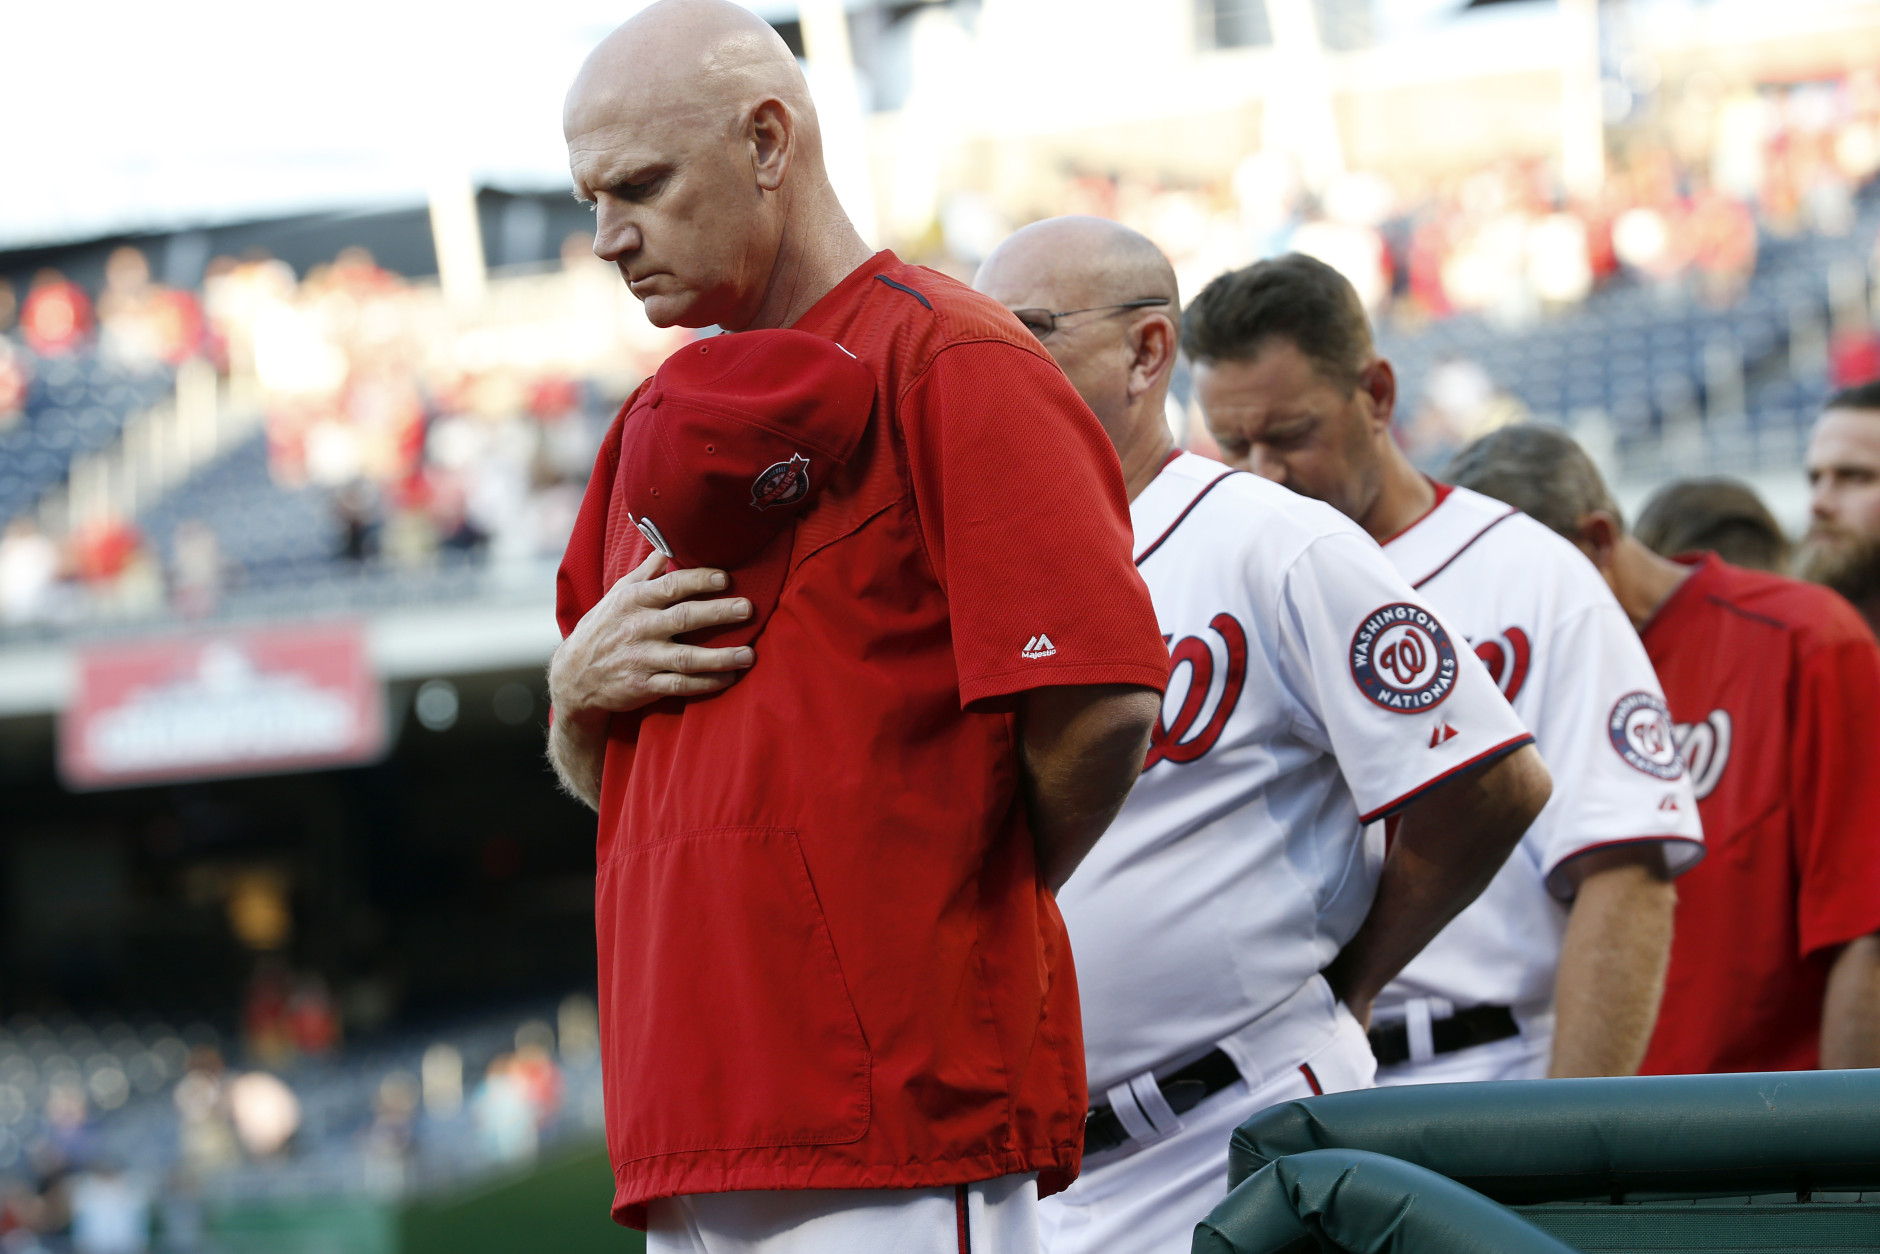 Washington Nationals manager Matt Williams, left, and other members of the Nationals observe a moment of silence before a baseball game against the San Diego Padres at Nationals Park in Washington on Wednesday, Aug. 26, 2015, for those killed and injured in the on-air shooting in Moneta, Va. (AP Photo/Alex Brandon)